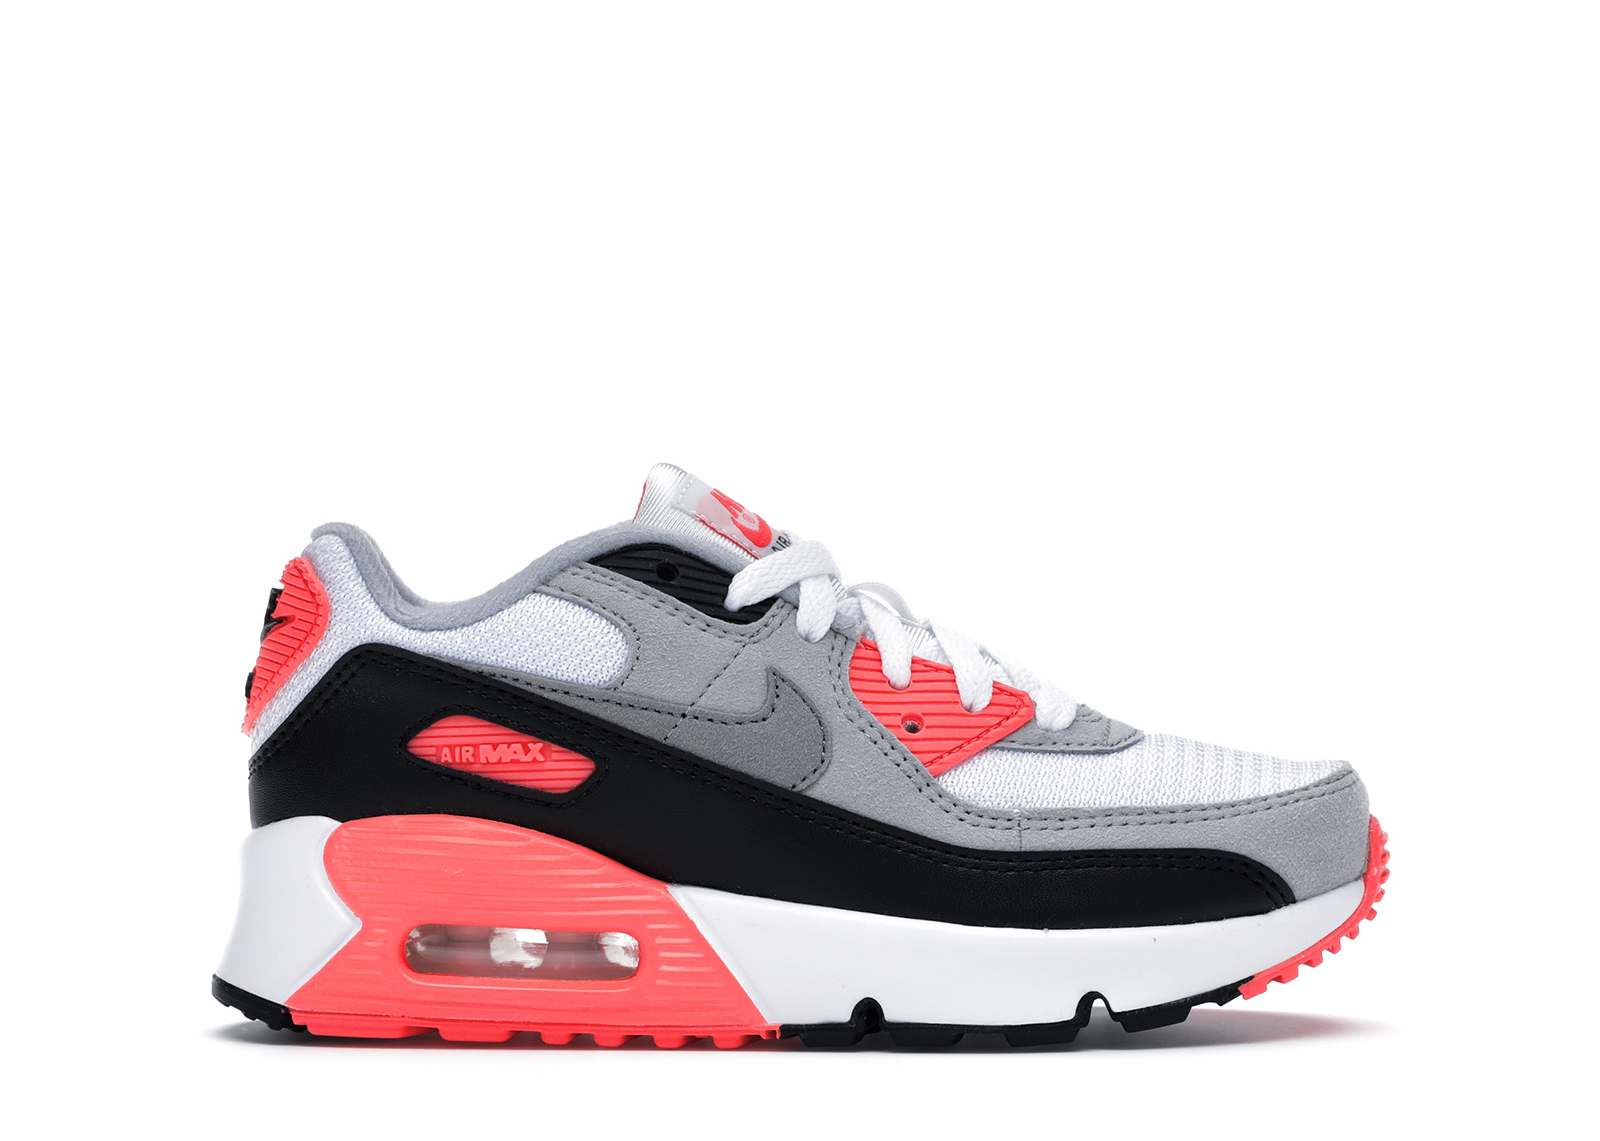 air max 90 infrared stockx